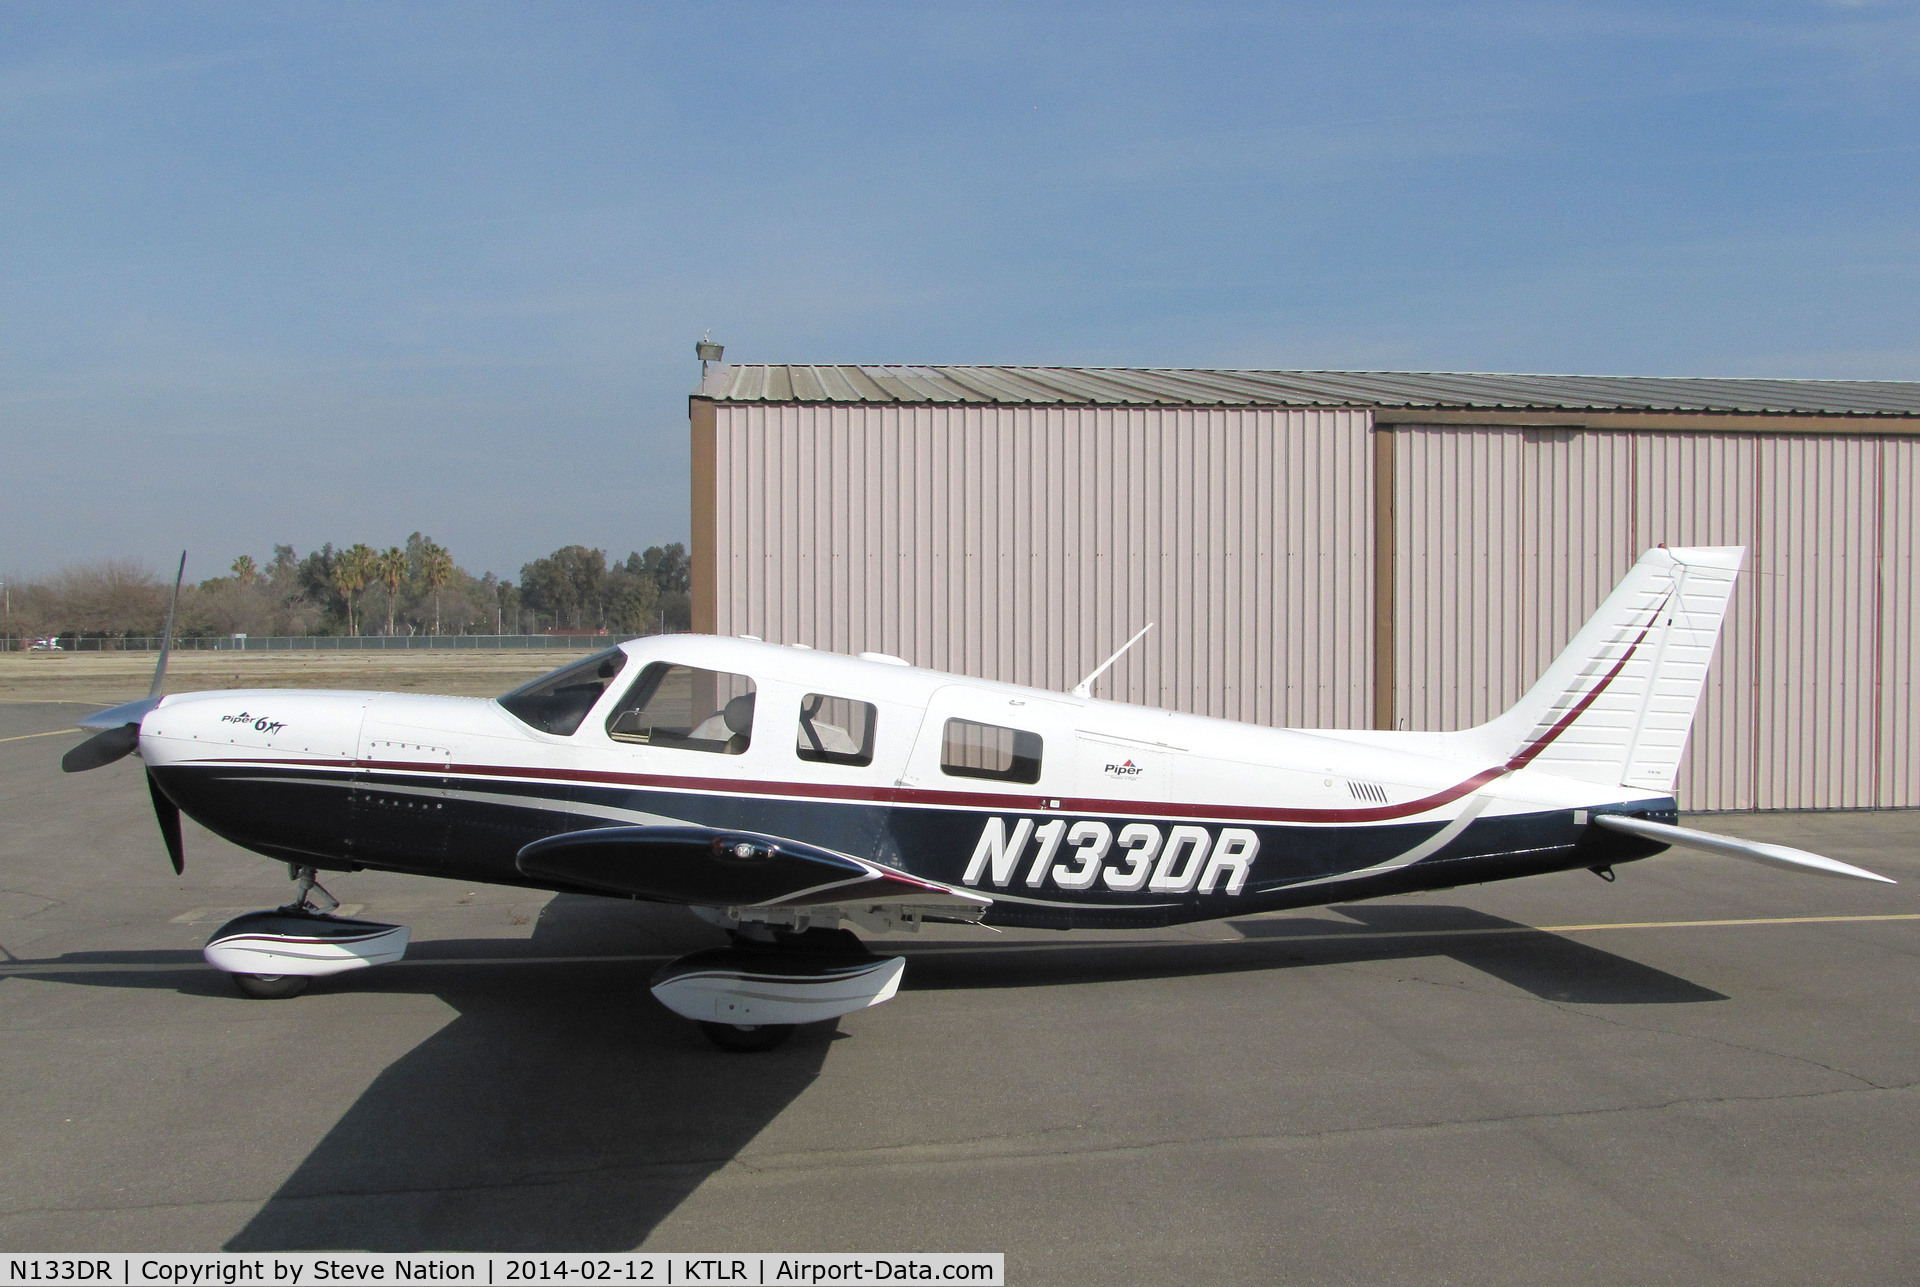 N133DR, 2005 Piper PA-32-301XTC Saratoga C/N 3255027, privately-owned PA-32-310XTC from Ballico, CA @ Mefford Field (Tulare, CA) for 2014 International Ag Expo